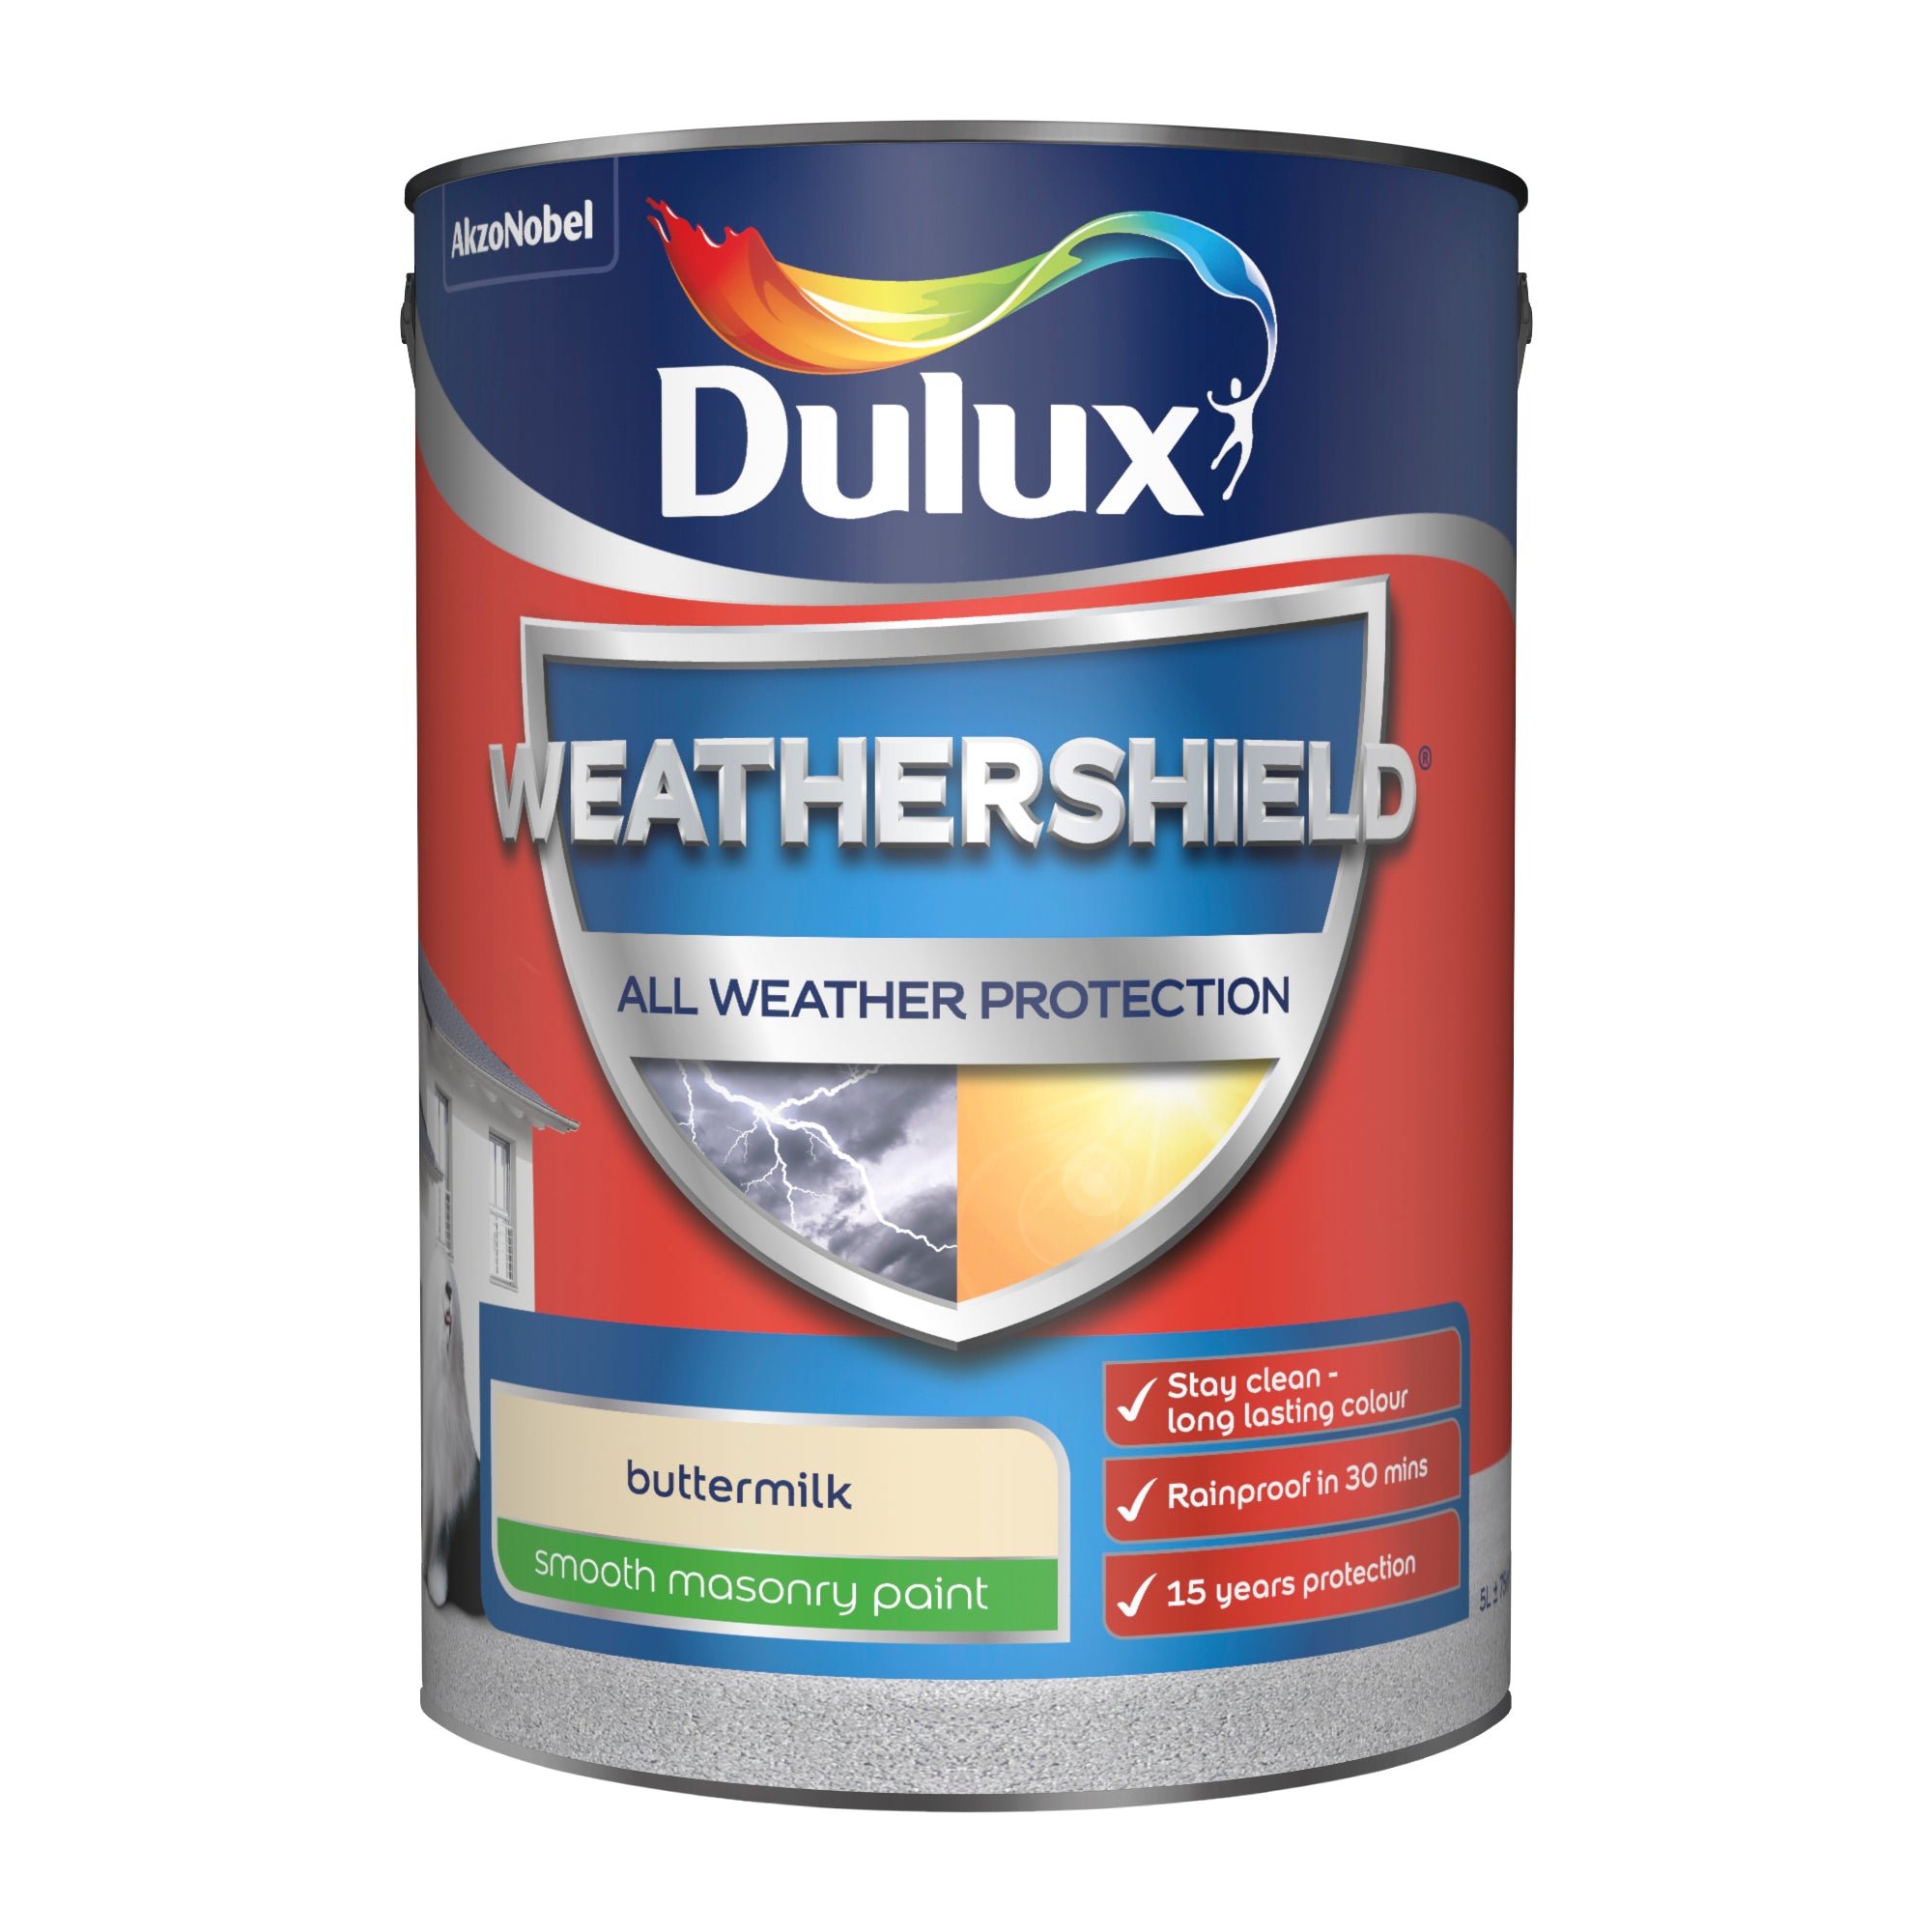 Dulux Weathershield All Weather Protection Smooth Buttermilk 5L